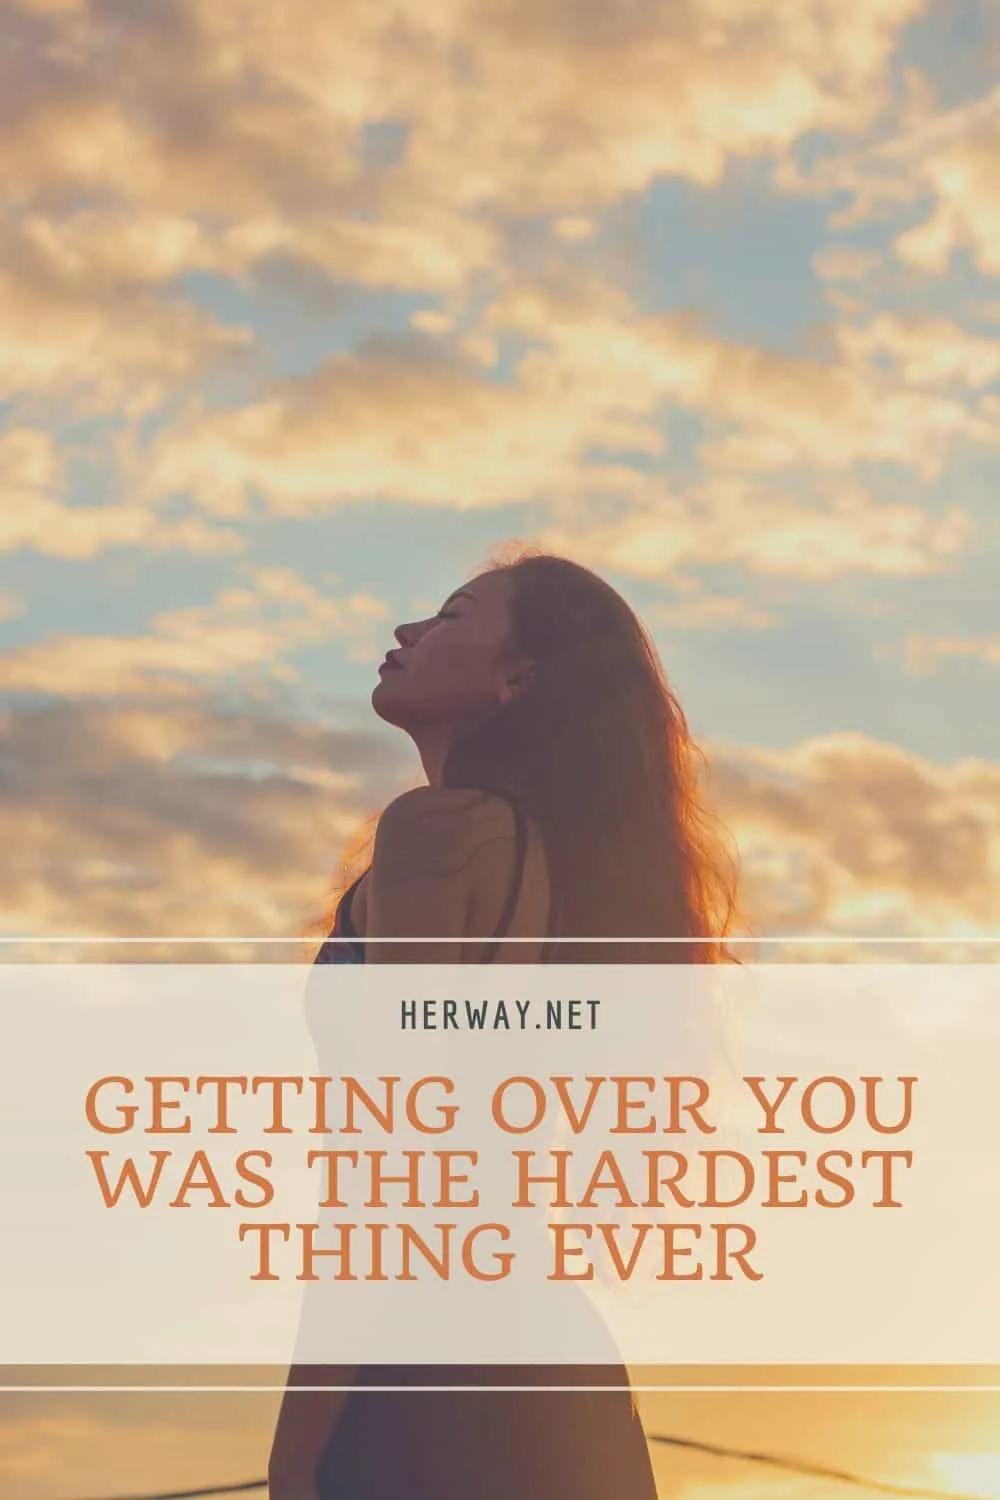 GETTING OVER YOU WAS THE HARDEST THING EVER